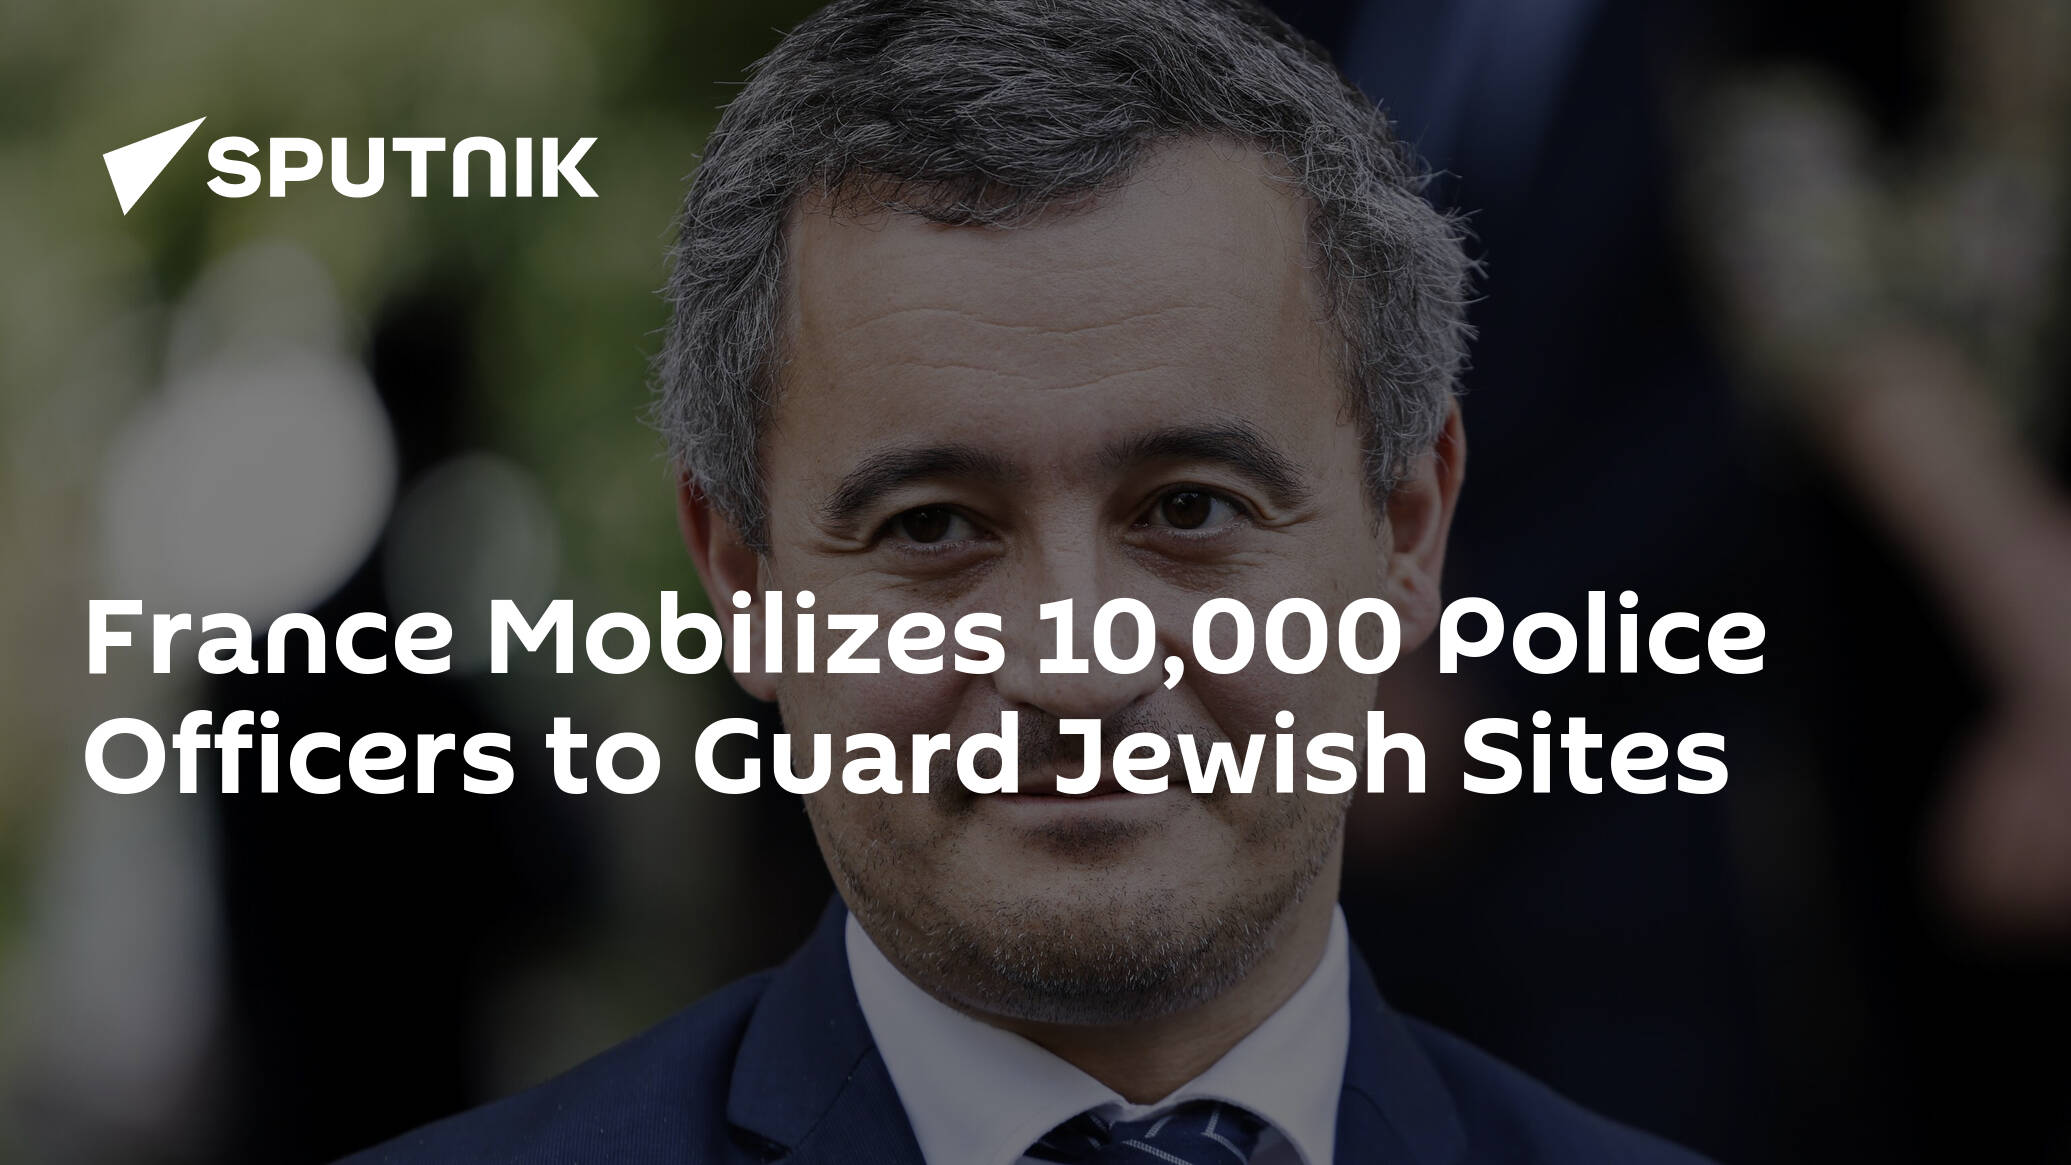 France Mobilizes 10,000 Police Officers to Guard Jewish Sites